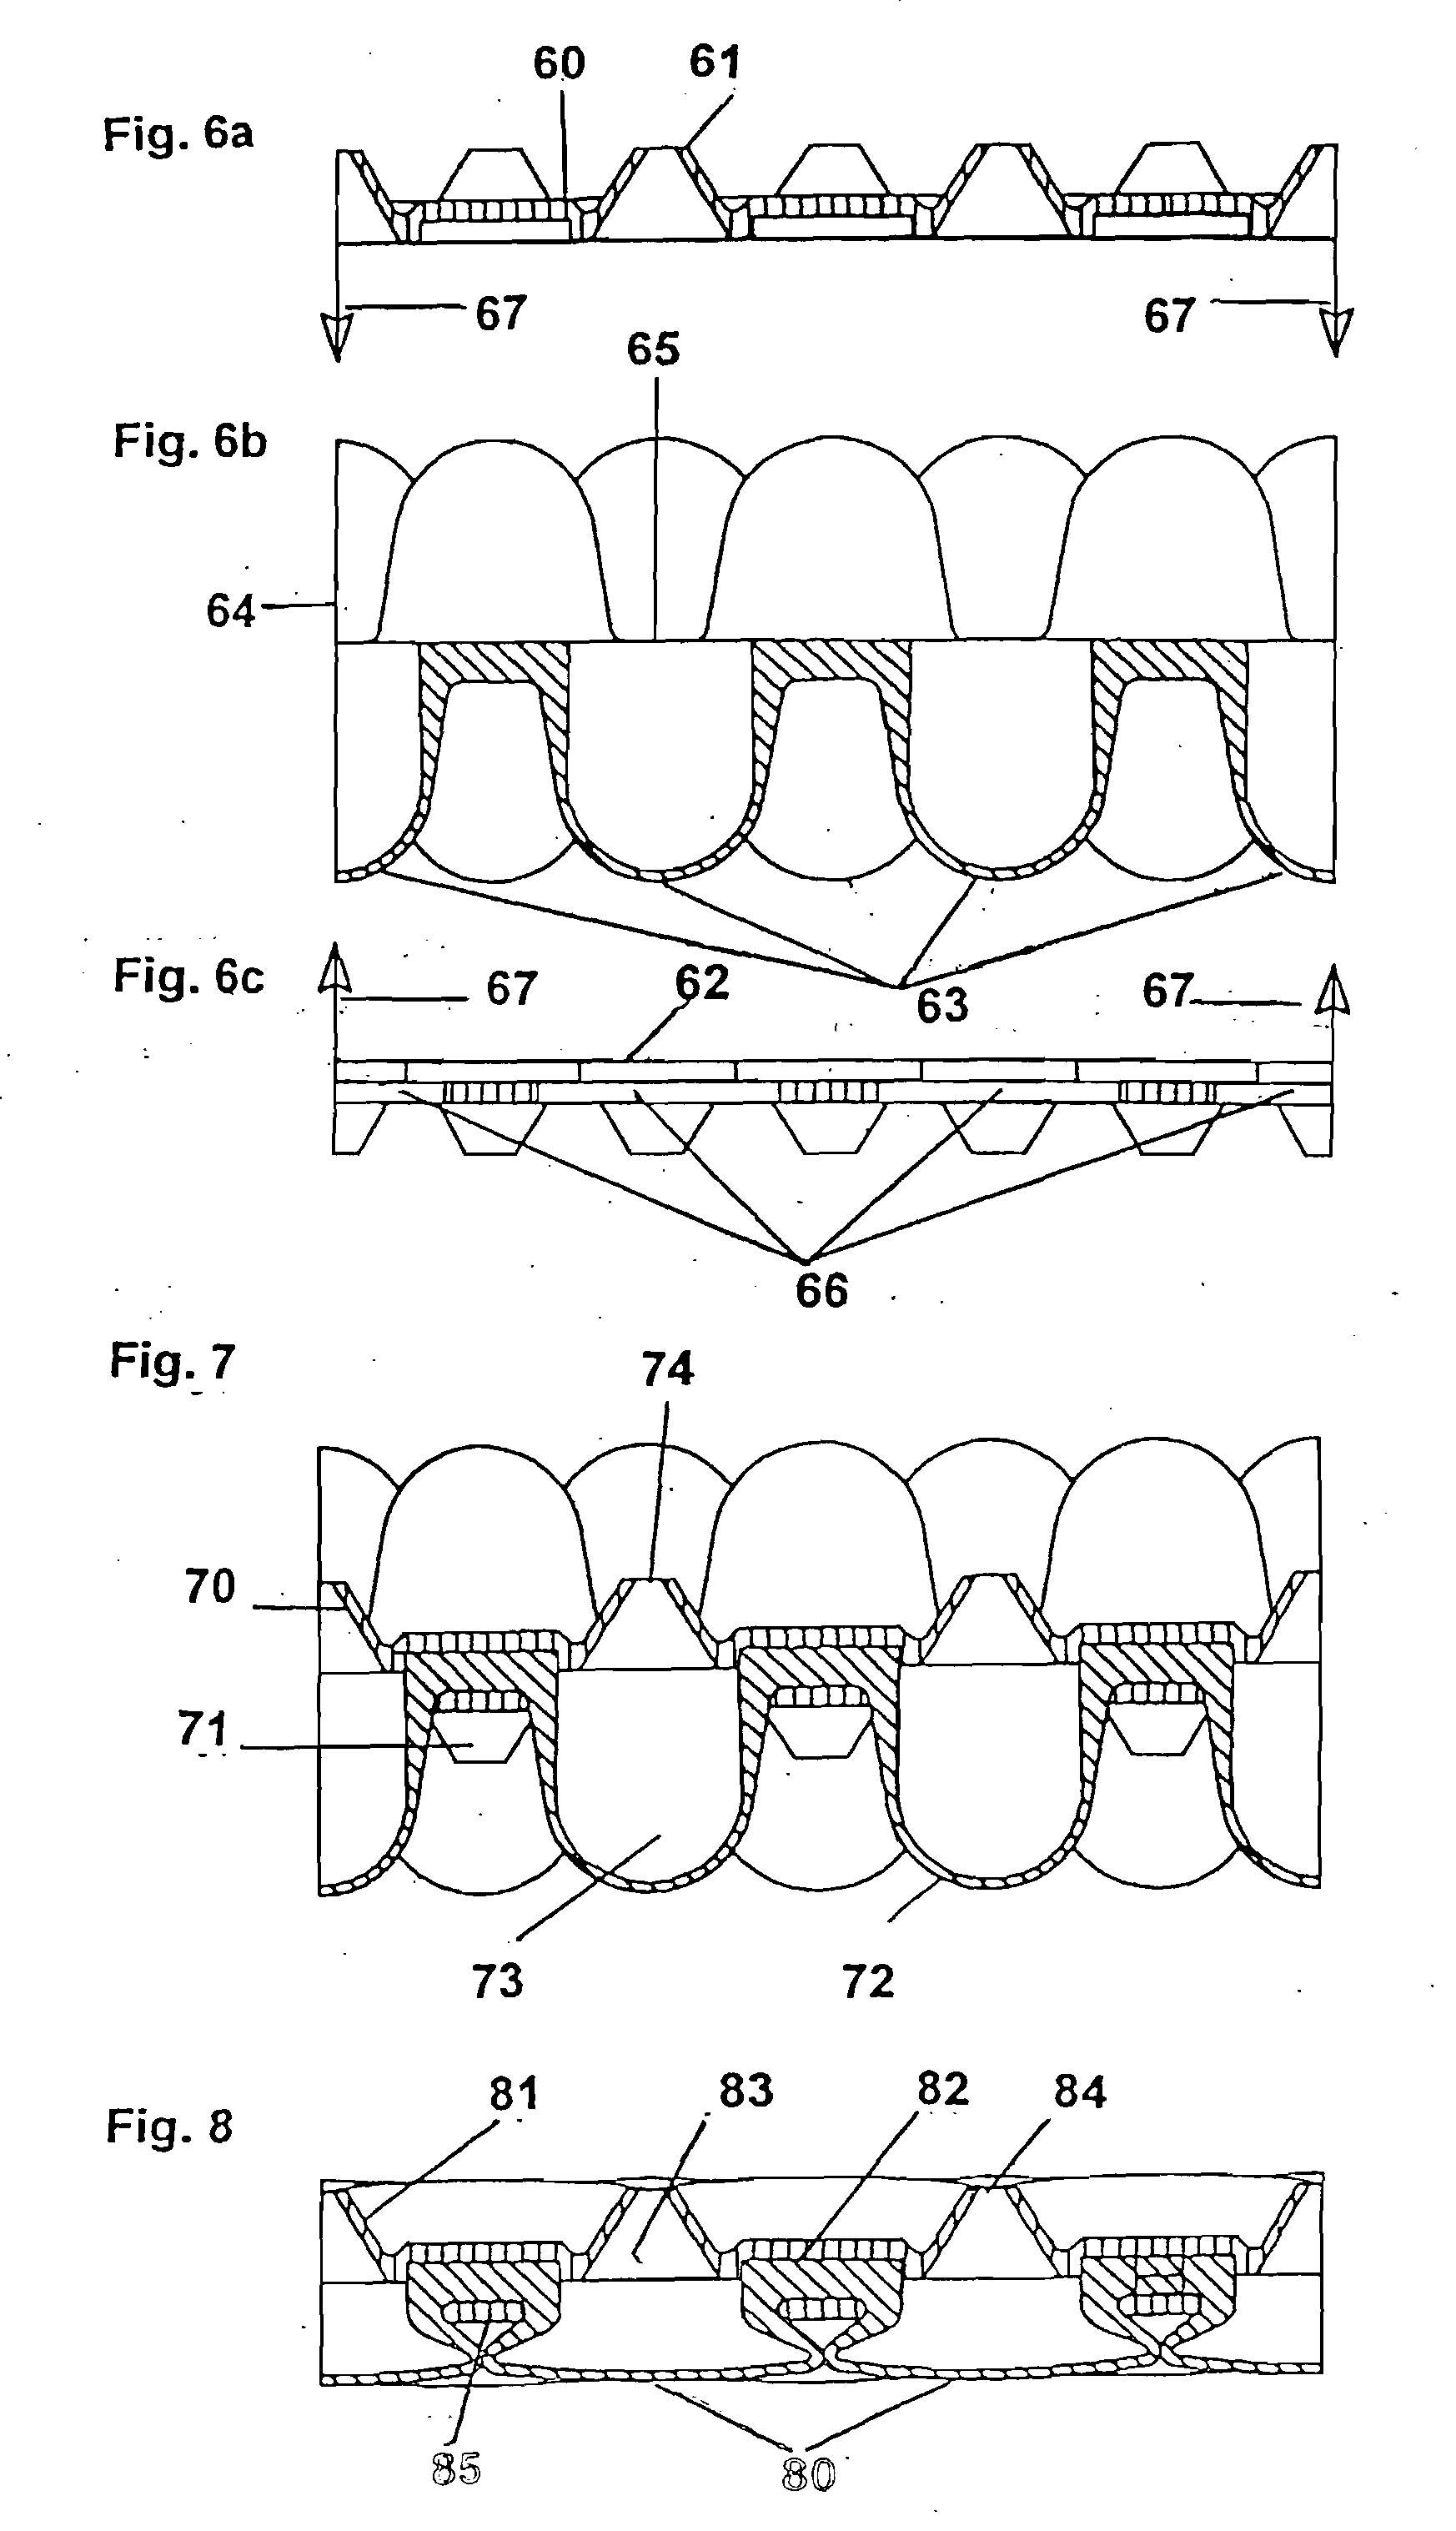 Flexible Formed Sheets for Treating Surfaces